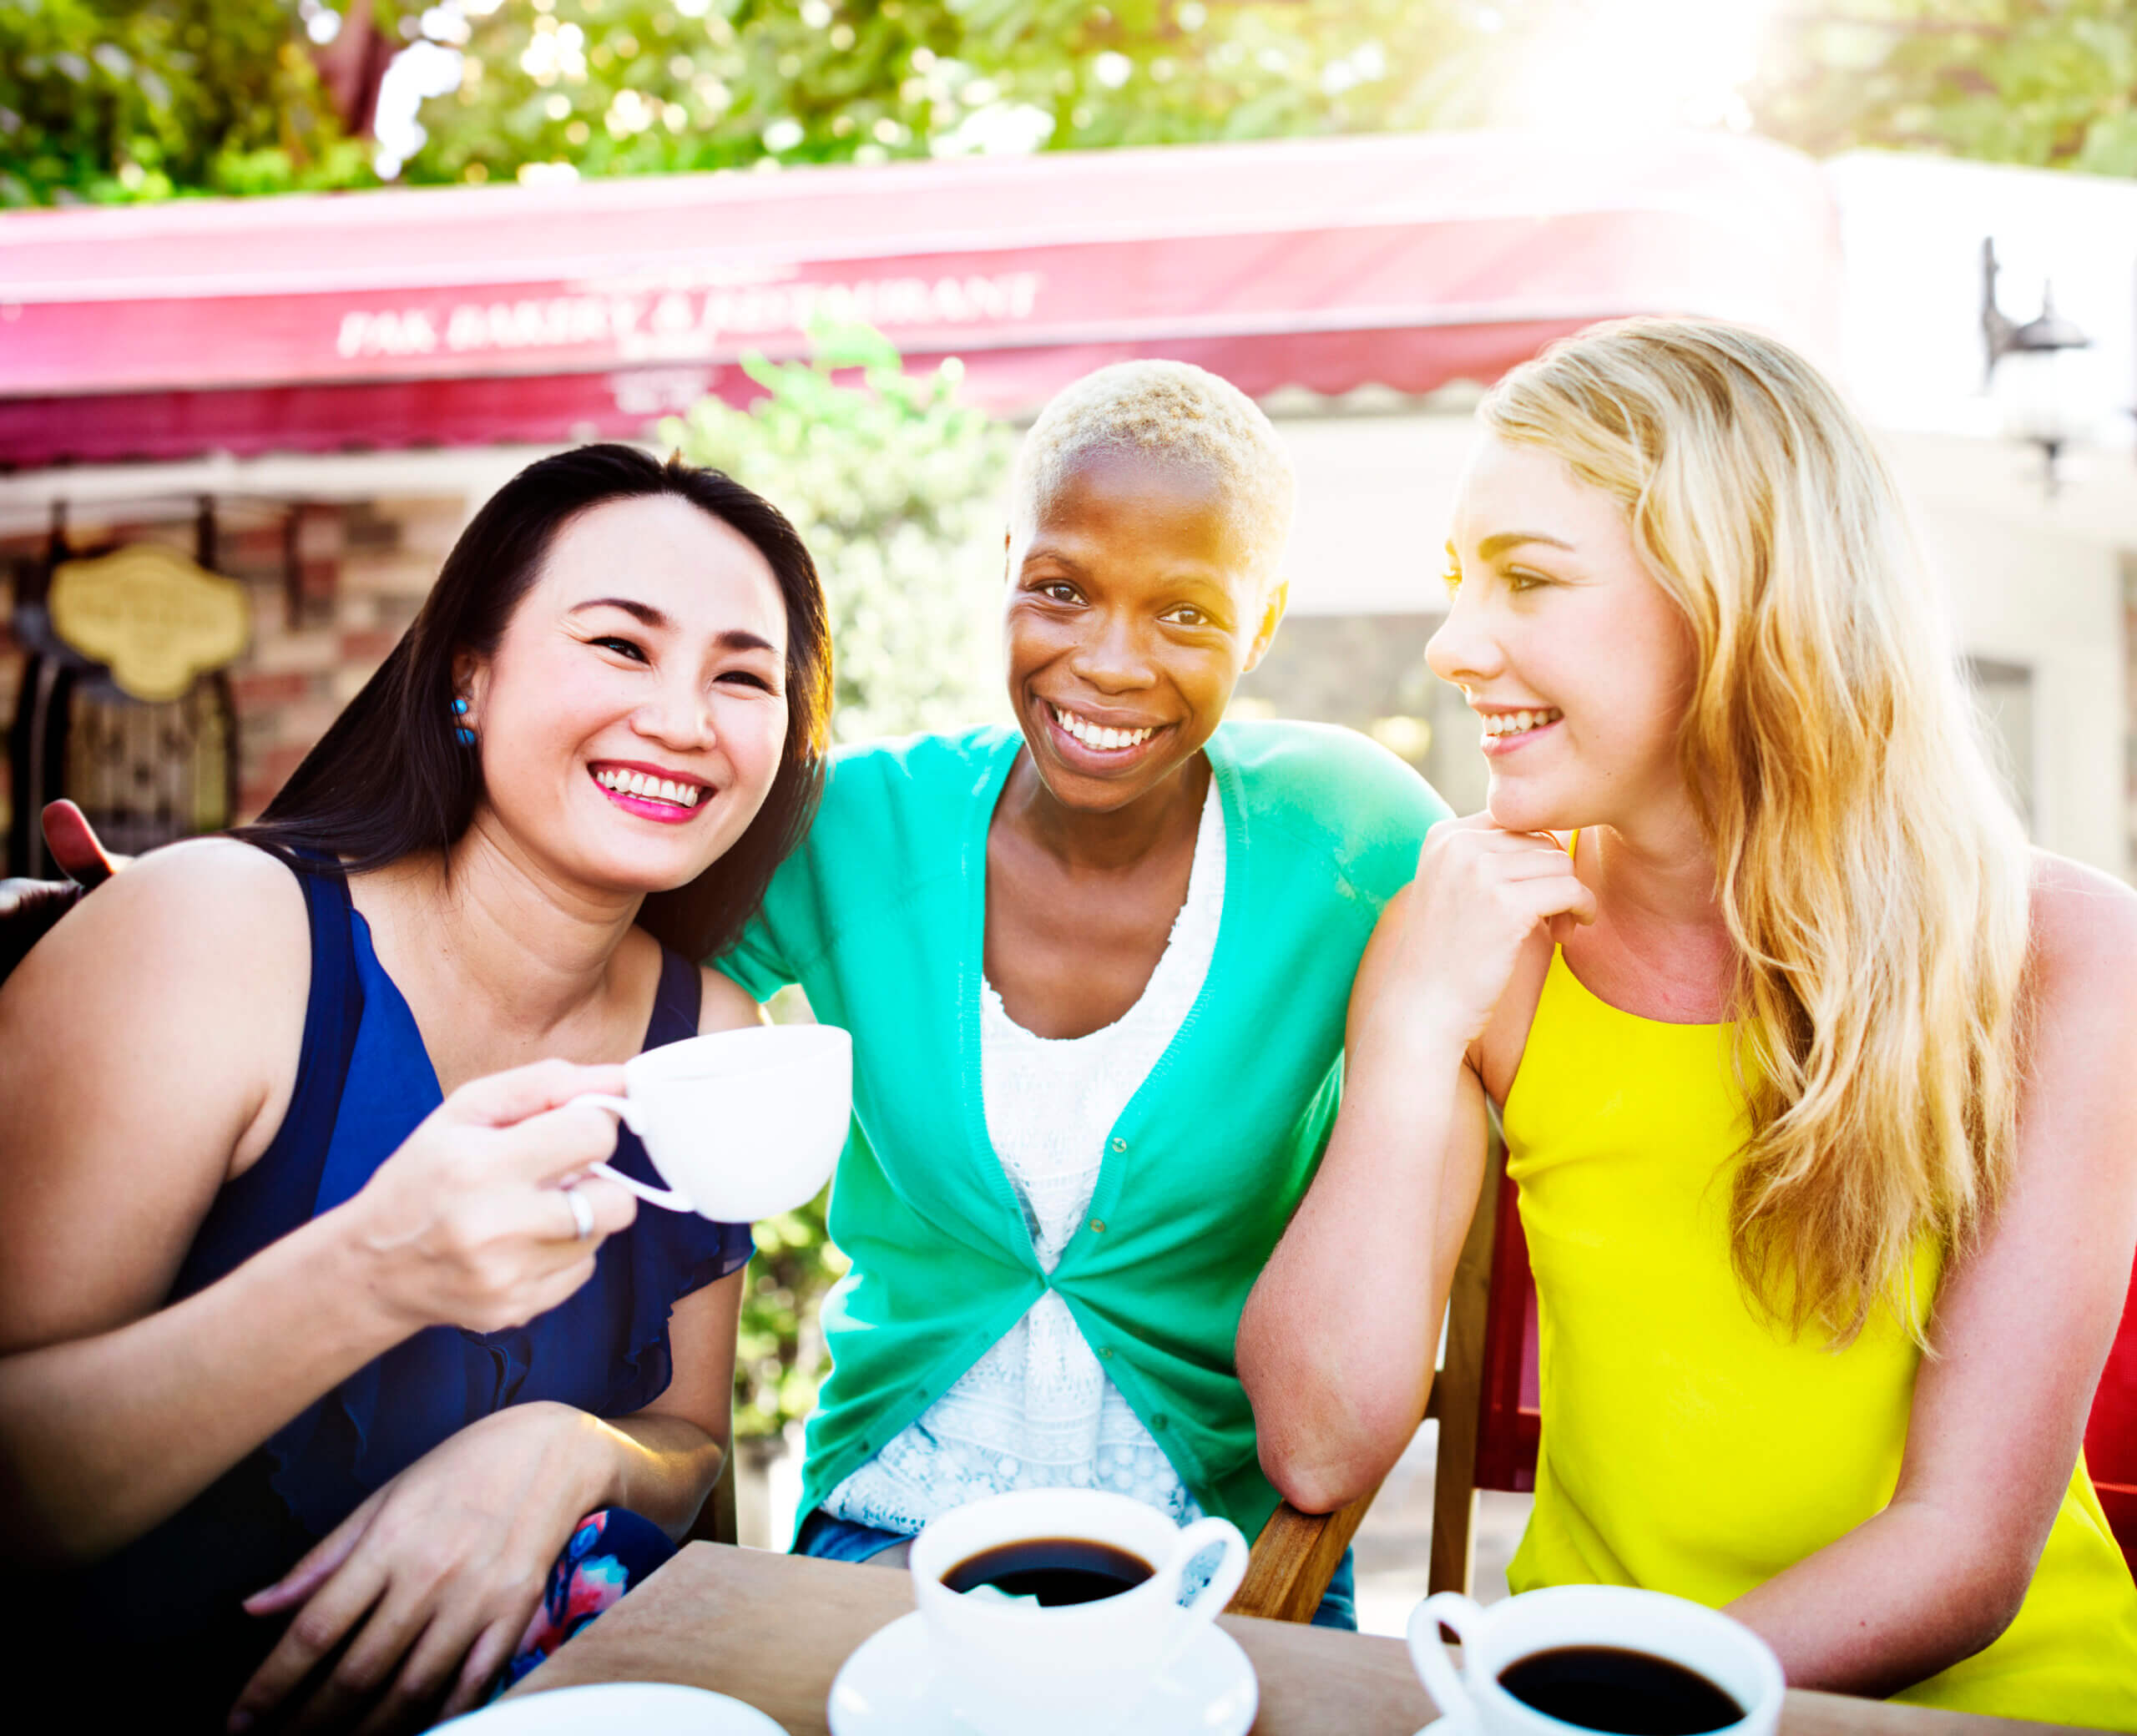 Is it hard for you to make friends because you're an introvert and don't want to make small talk? Here are simple ways to make friends when you're an introvert and a mom. www.coffeeandcarpool.com